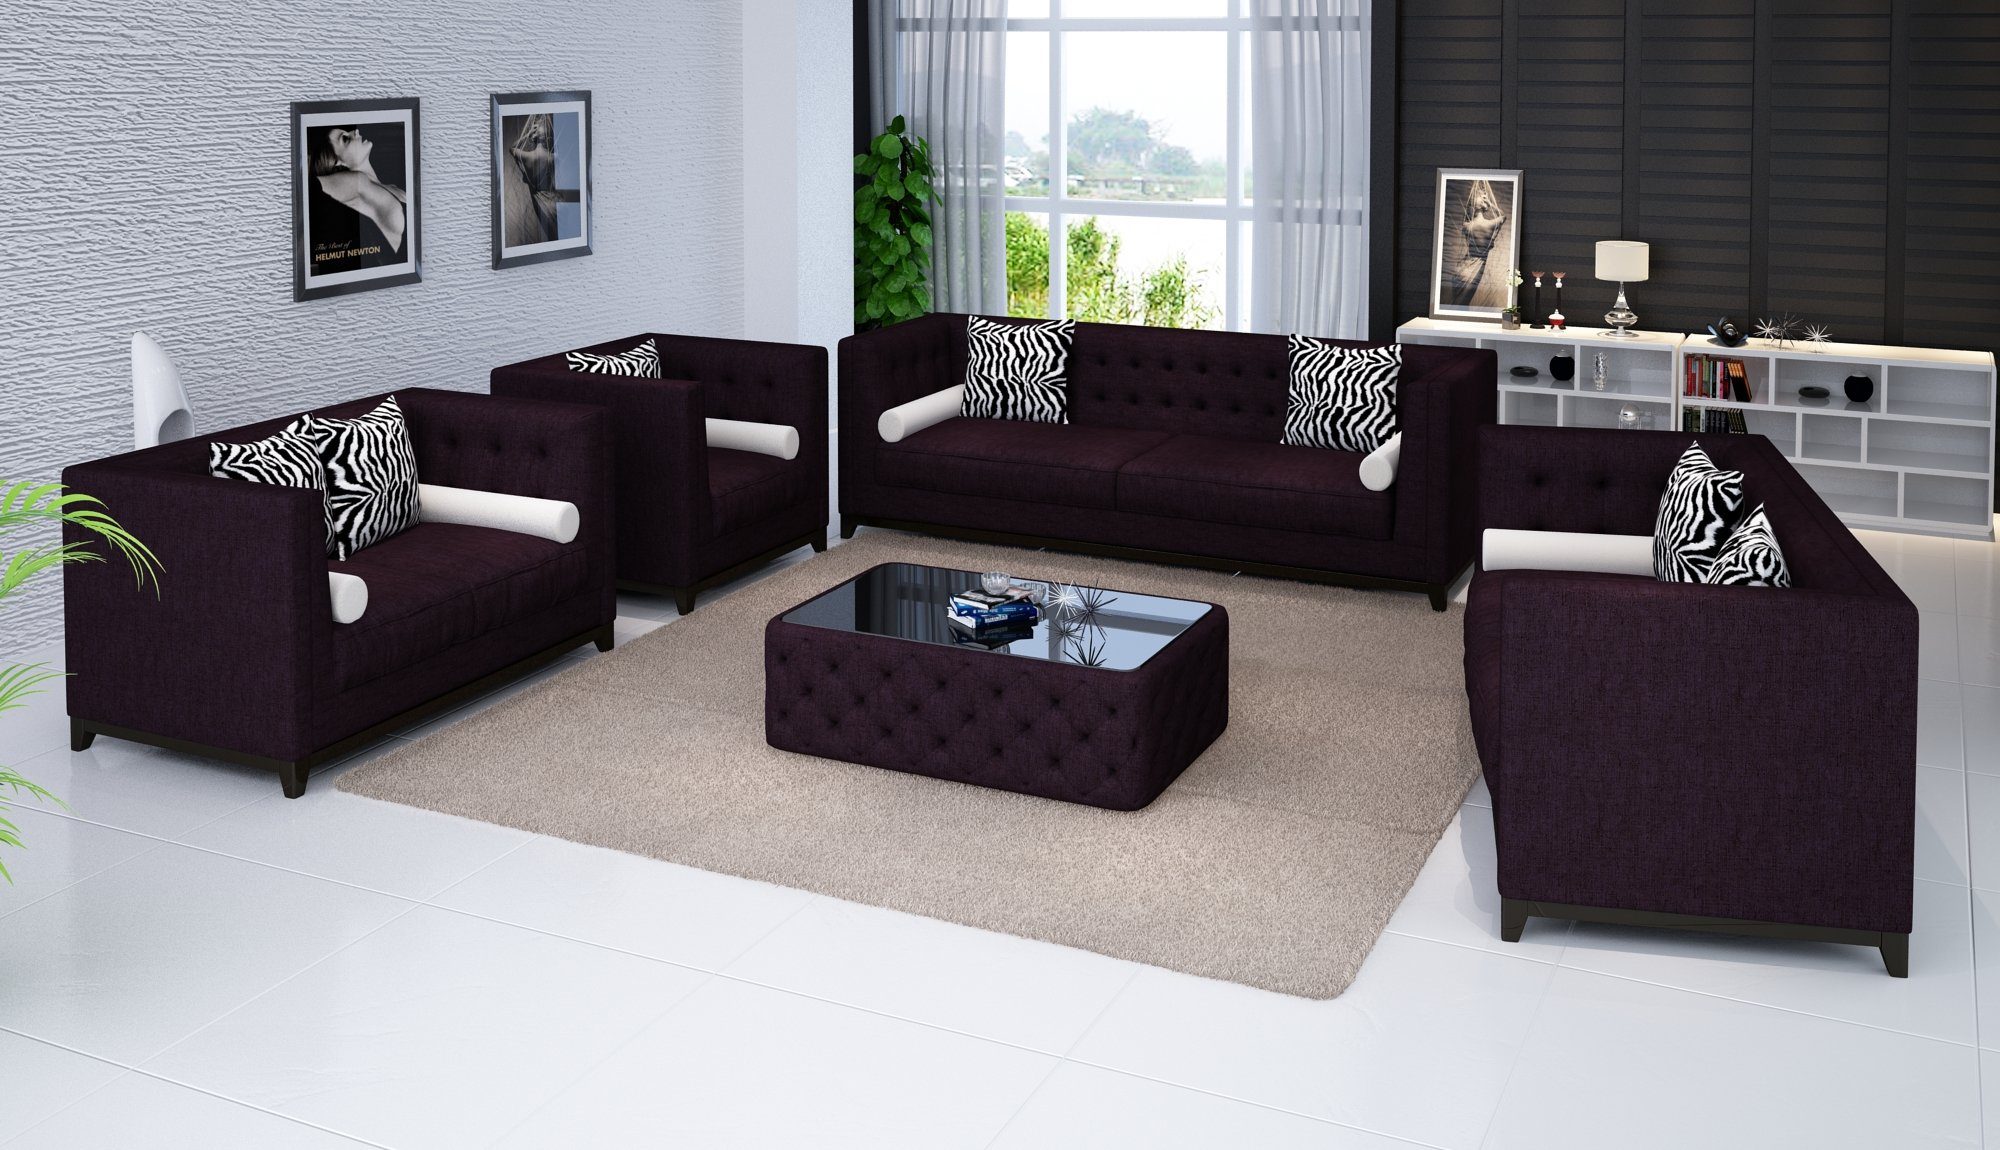 in Chesterfield Sofa Couchen Rote Sofagarnitur JVmoebel Couch Made Sofa Lila Europe Sessel, 3tlg